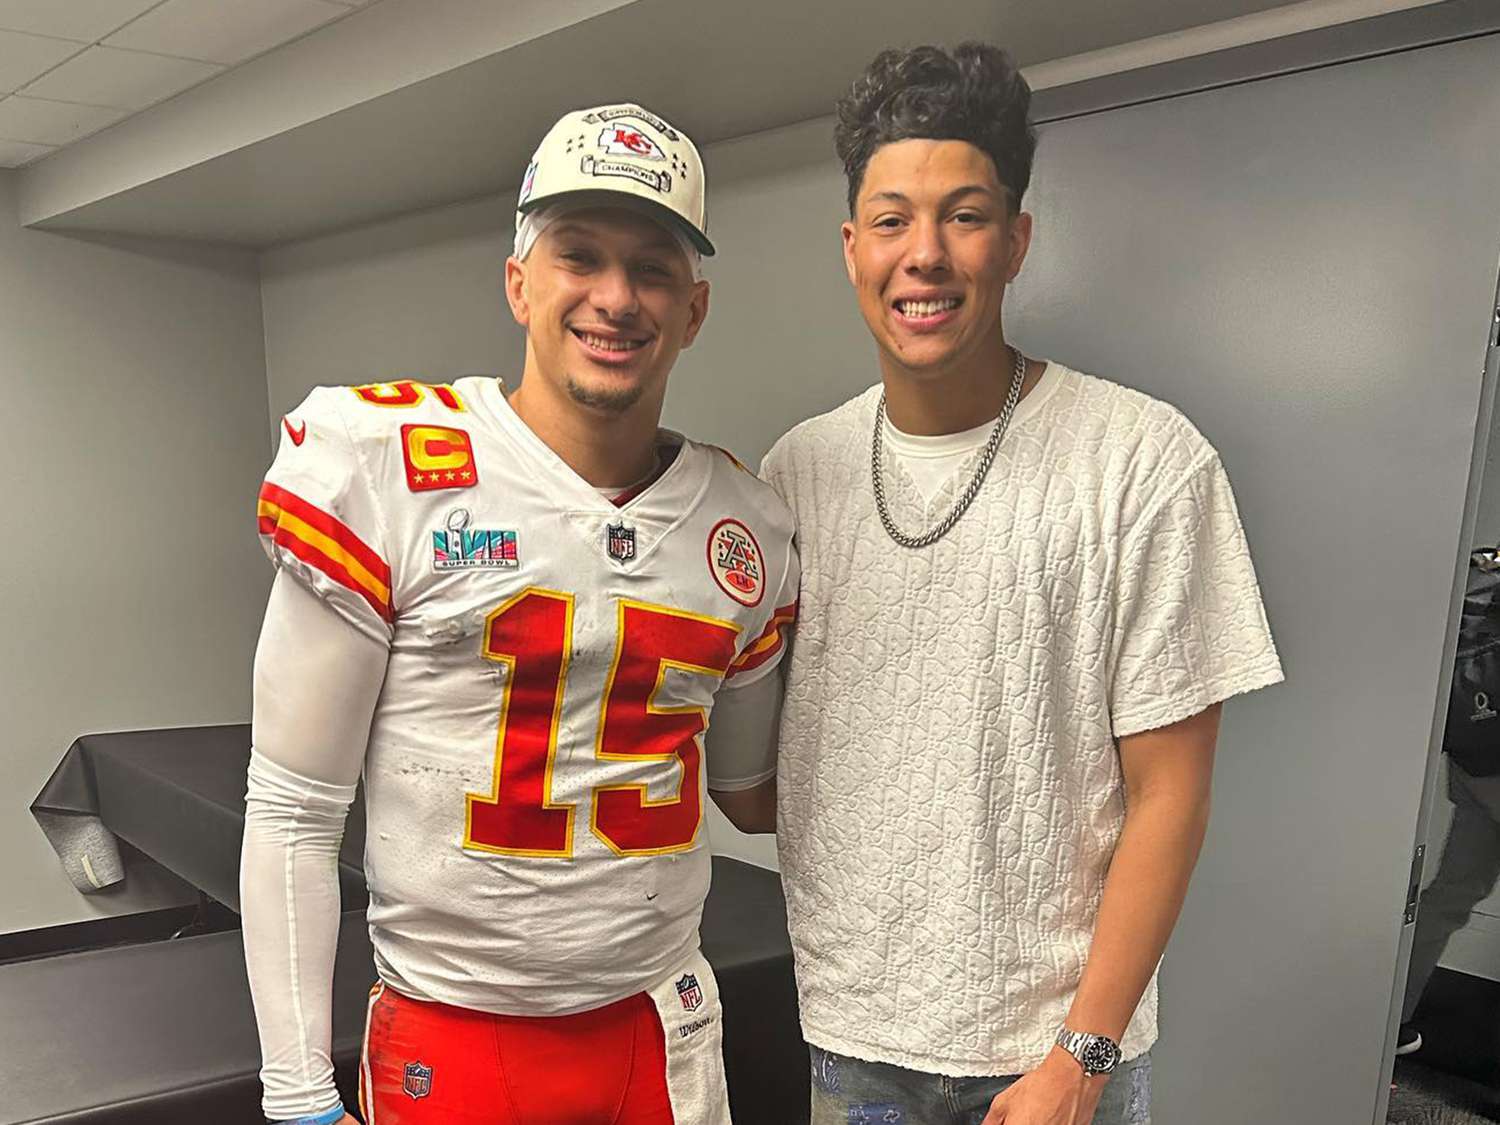 Patrick Mahomes Brother Jackson Leaves an Emotional Message Amid 50-Year-Old Mom's Update